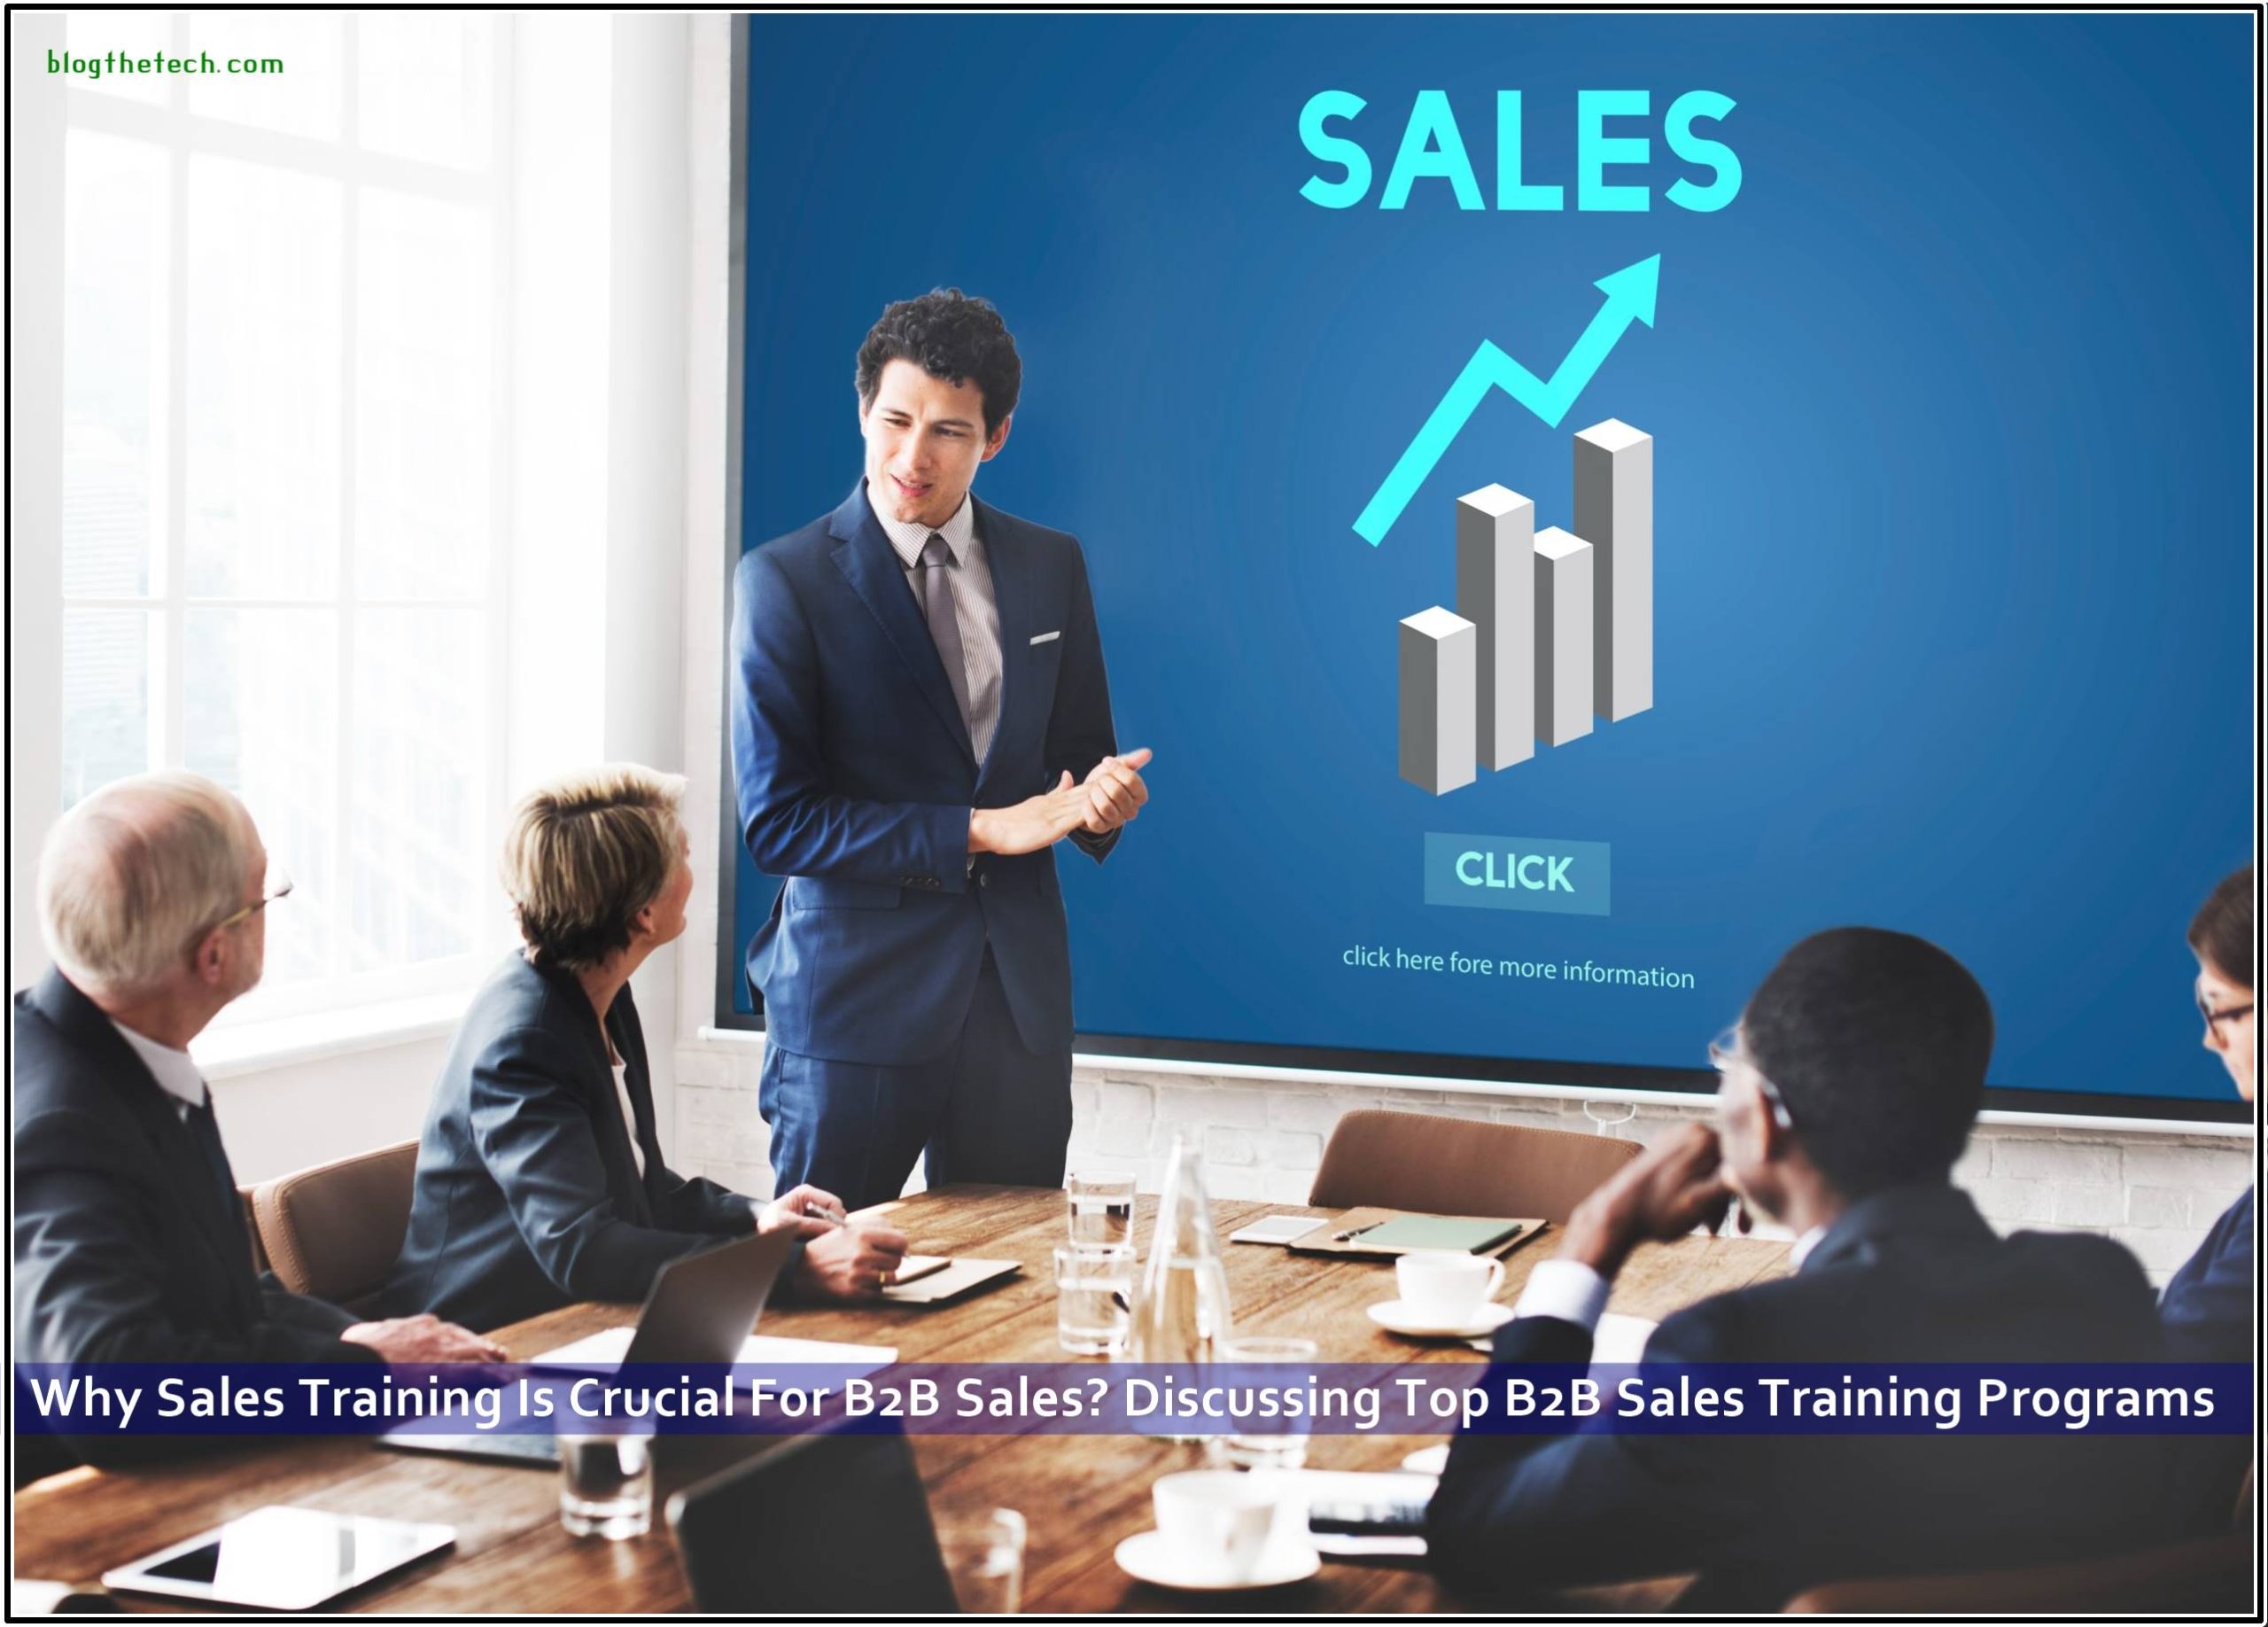 Why Sales Training Is Crucial For B2B Sales? Discussing Top B2B Sales Training Programs